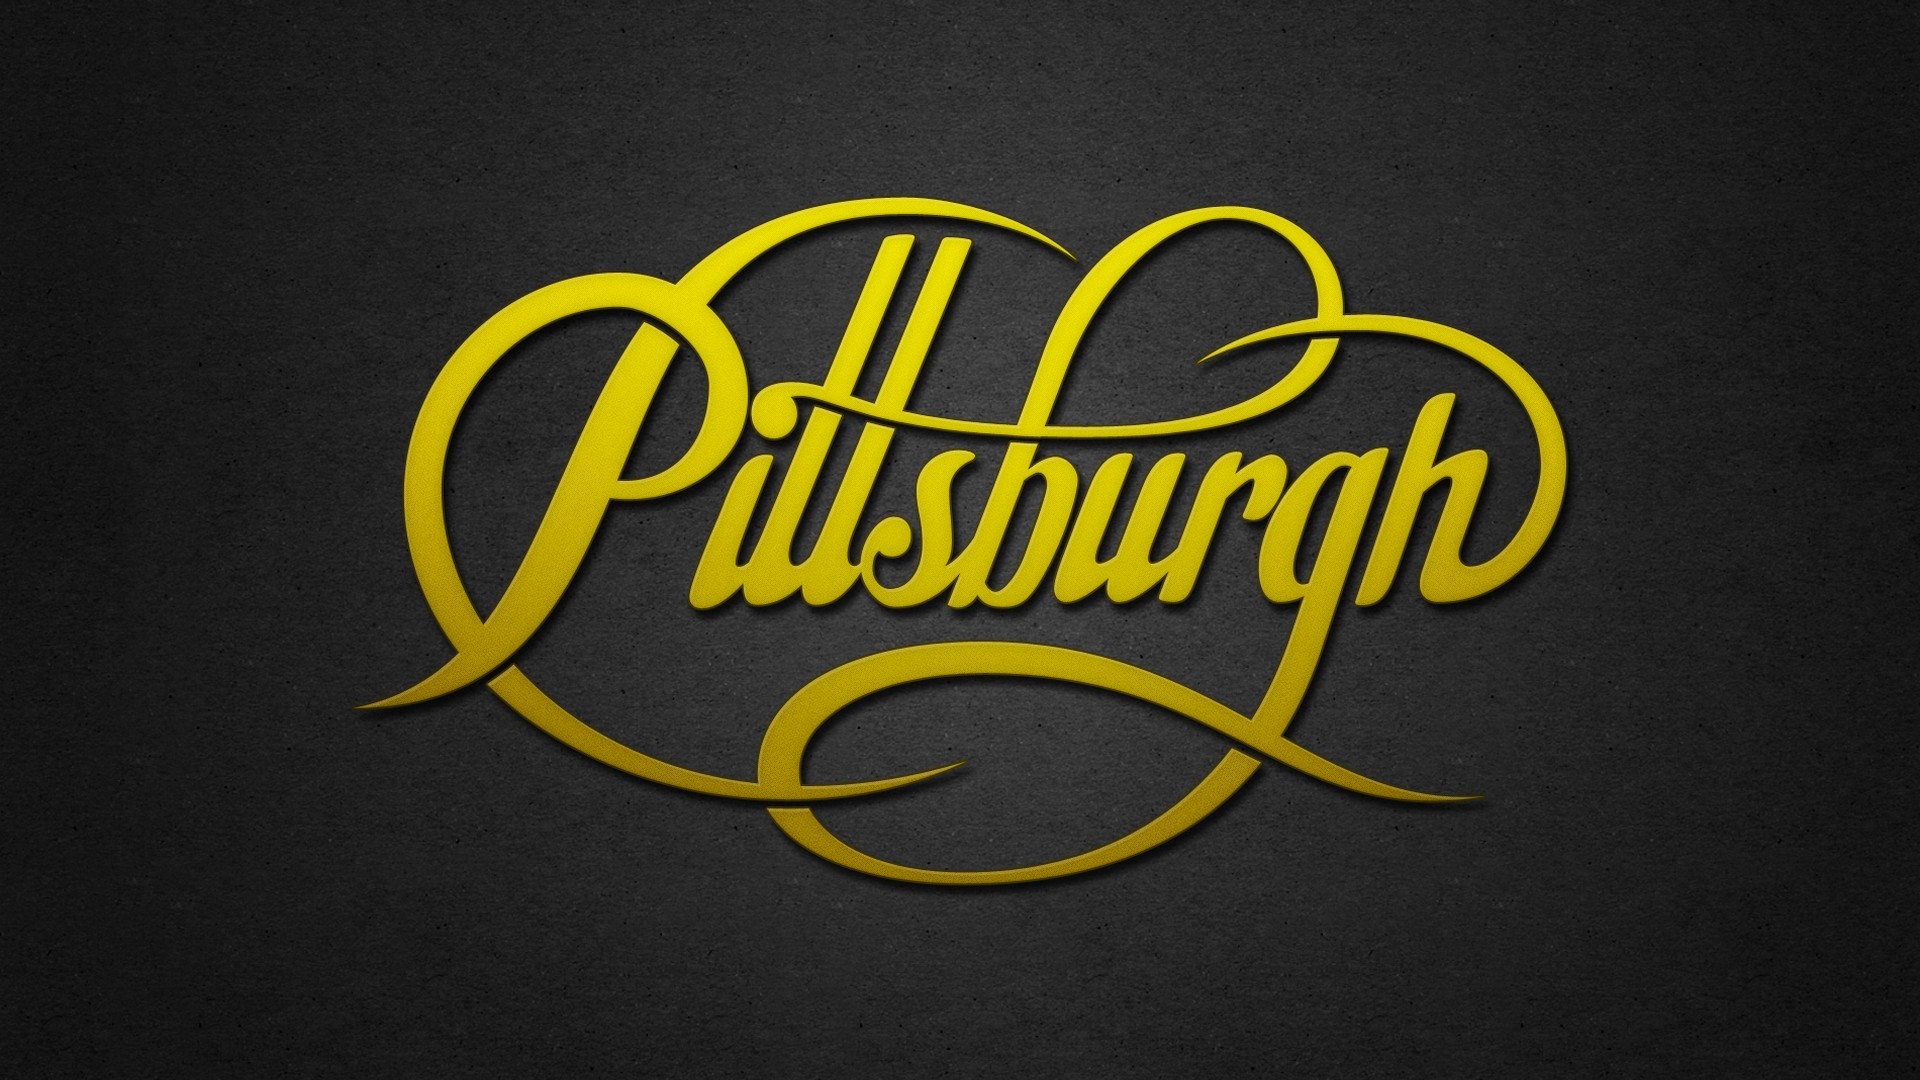 1920x1080 Wallpapers HD Pittsburgh Steelers with resolution  pixel. You can  make this wallpaper for your